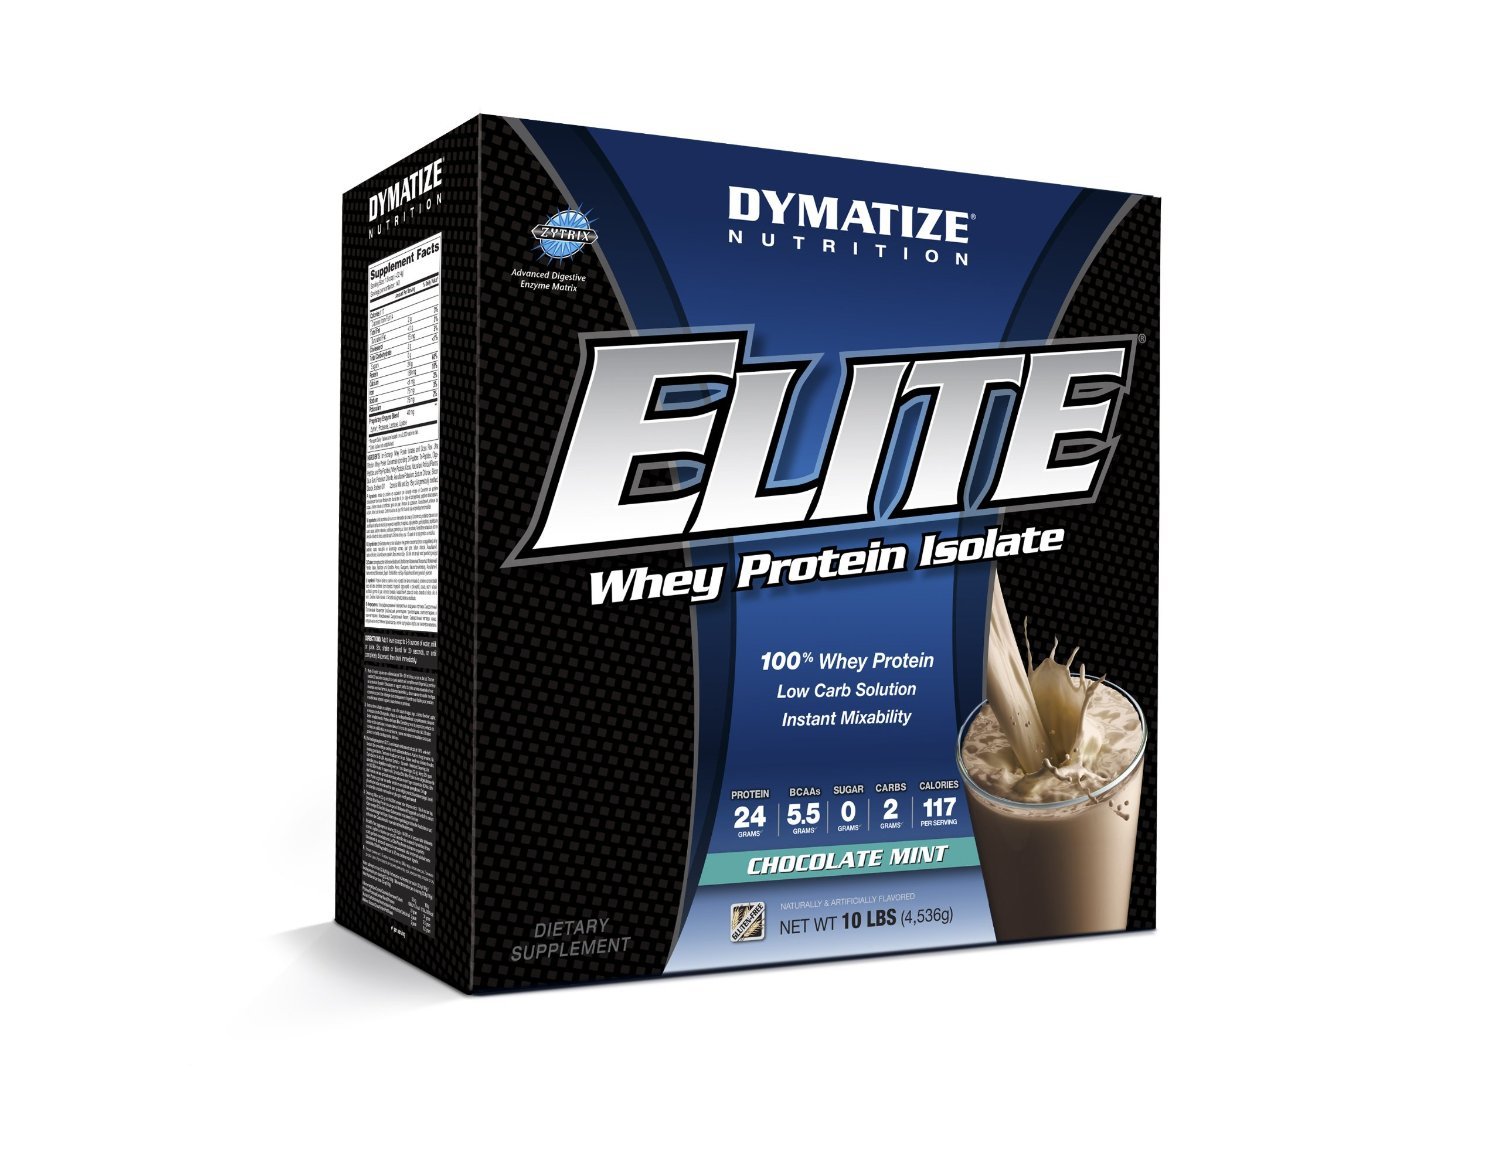 Elite Whey Protein Isolate, 4580 g, Dymatize Nutrition. Whey Isolate. Lean muscle mass Weight Loss recovery Anti-catabolic properties 